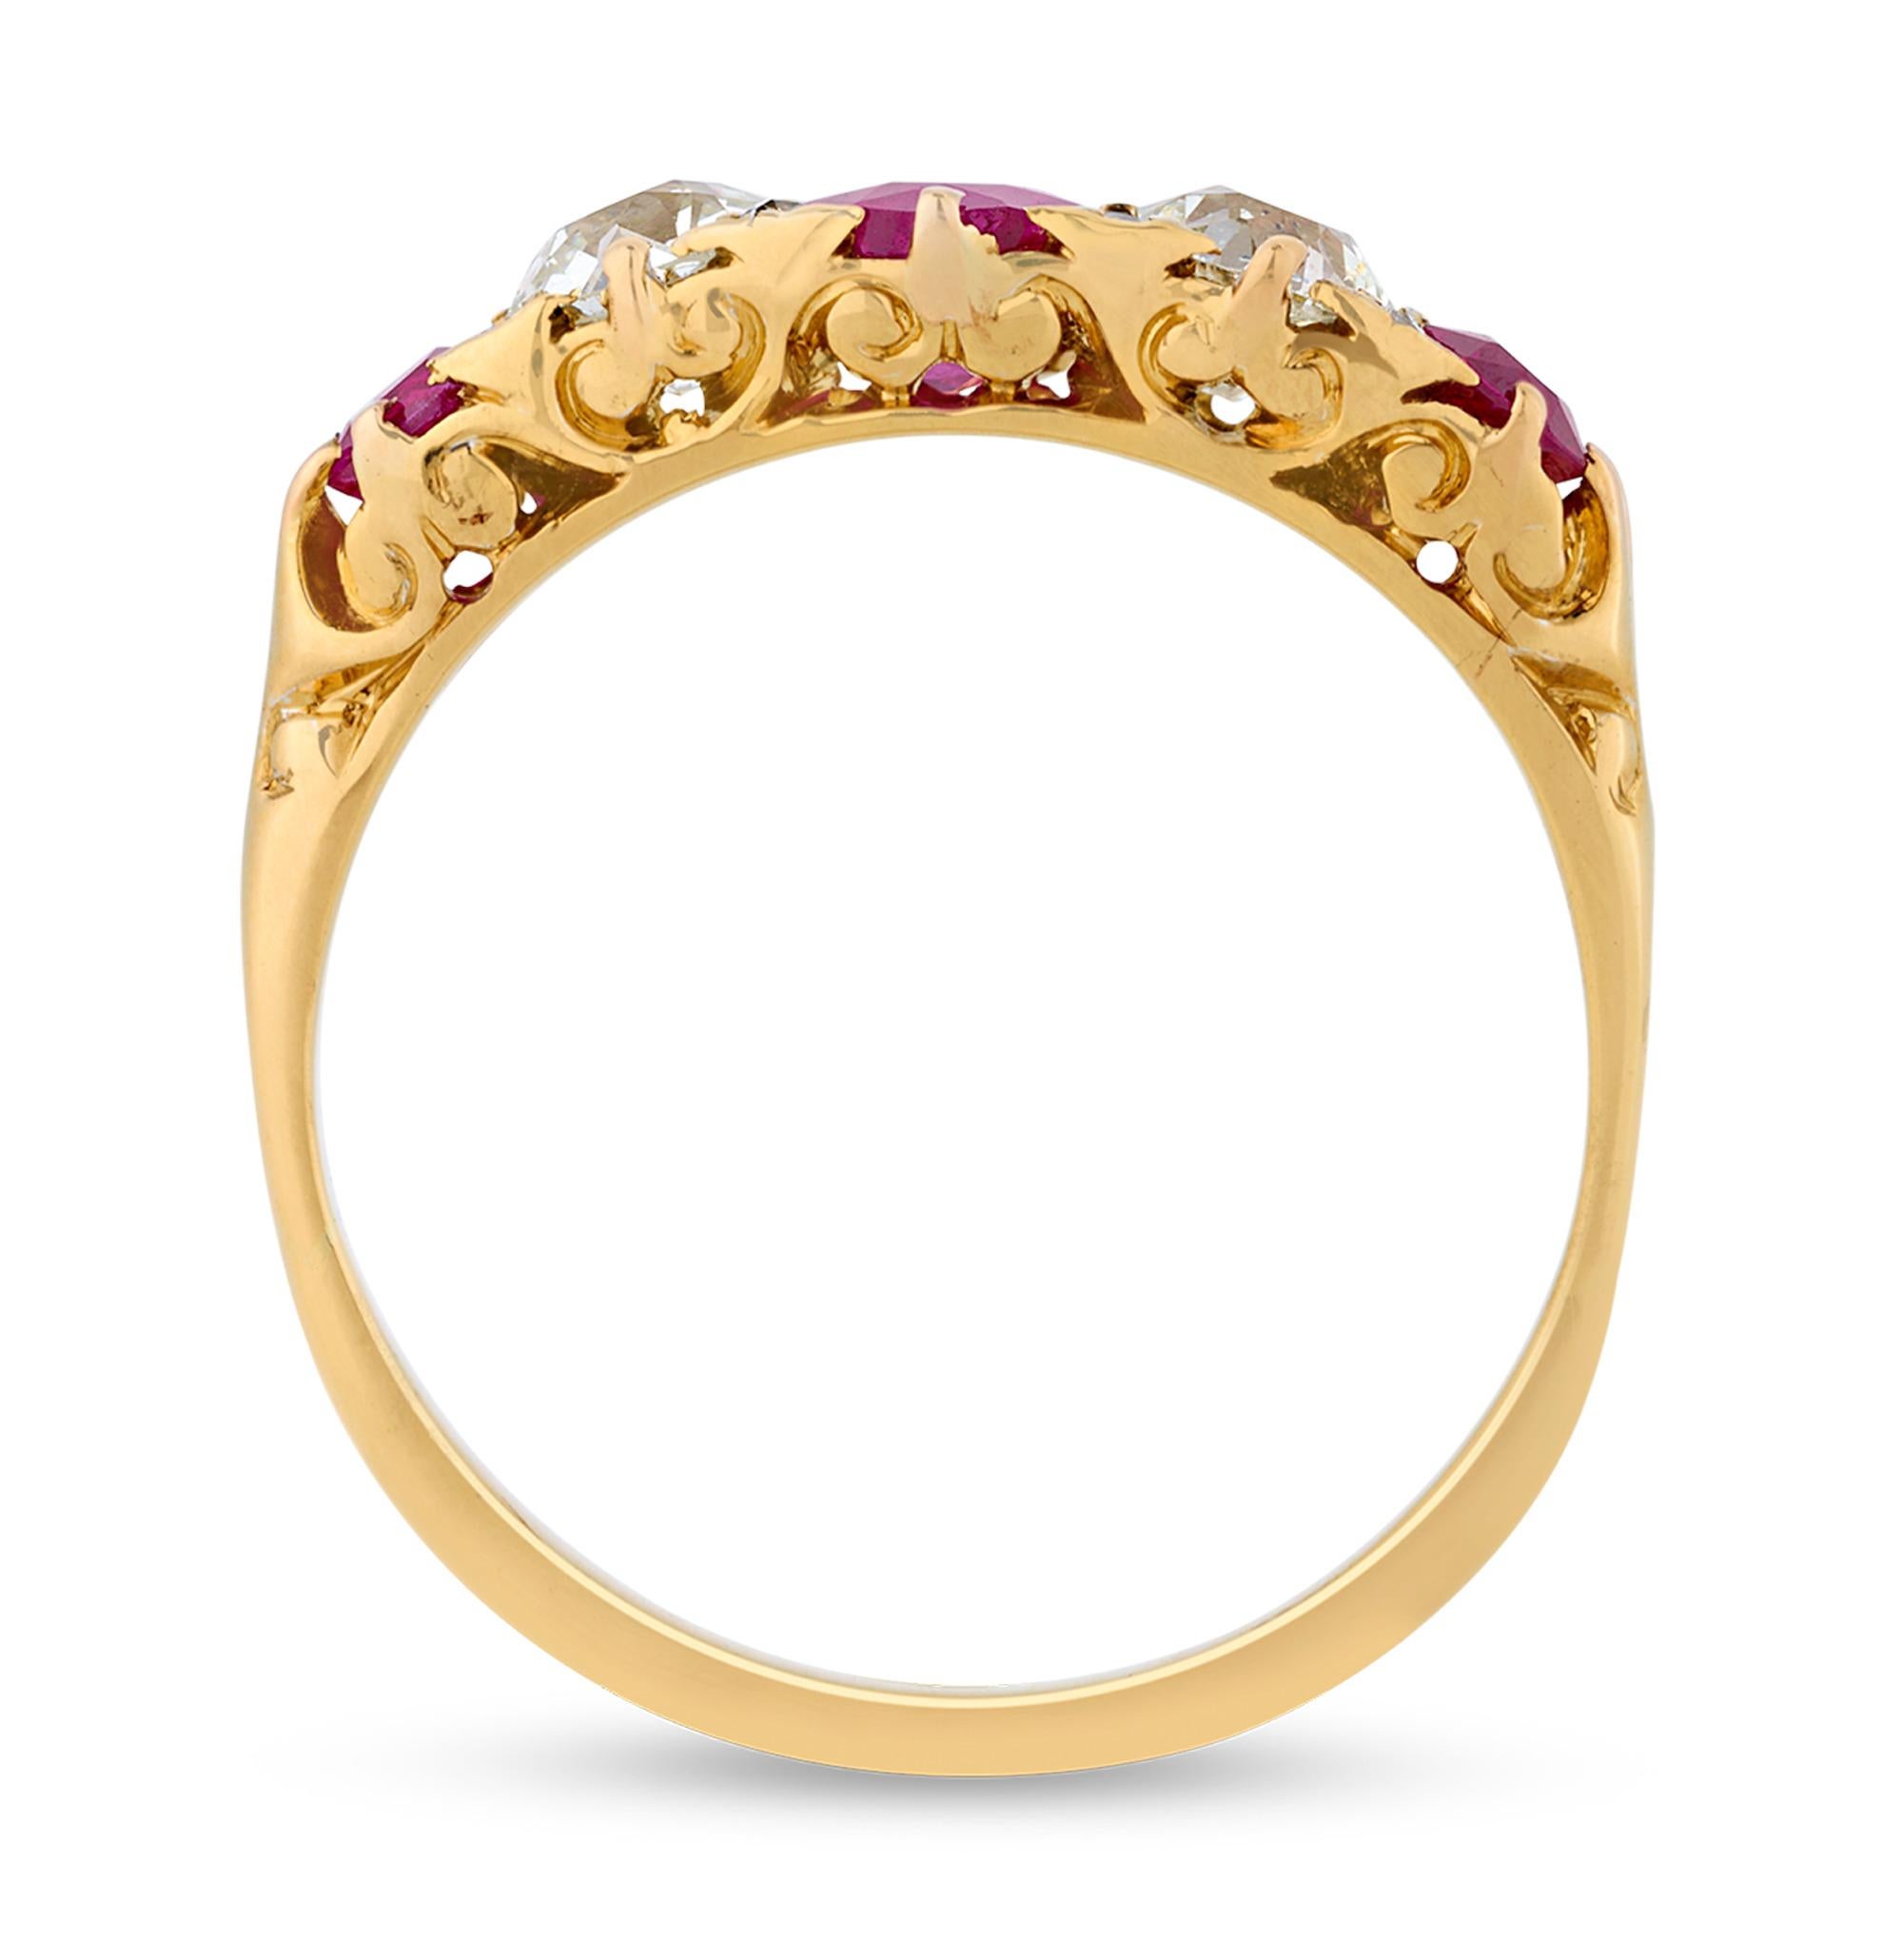 This antique cocktail ring showcases 1.10 carats of untreated Burma rubies interspersed with glittering Old Mine-cut white diamonds. Burmese rubies are widely considered among the rarest of all gemstones. For centuries, the Burmese ruby has ranked